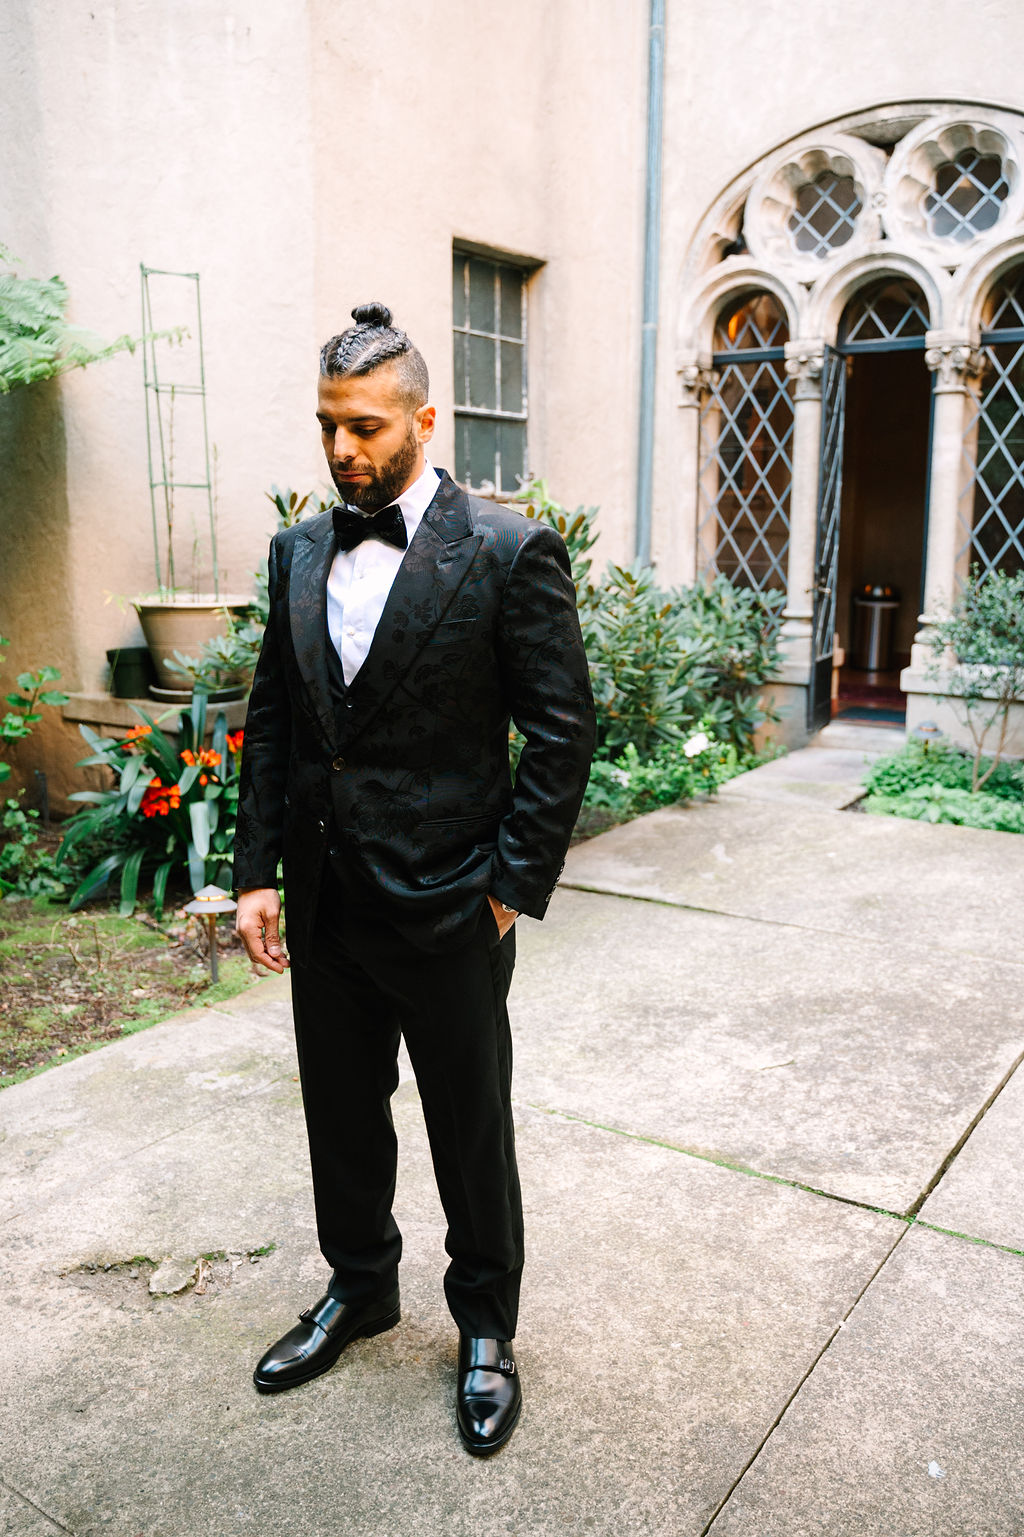 groom portraits groom wedding style man braids classy satin black suit with floral details and sparkly sequenced bowtie berkeley city club courtyard wedding first look